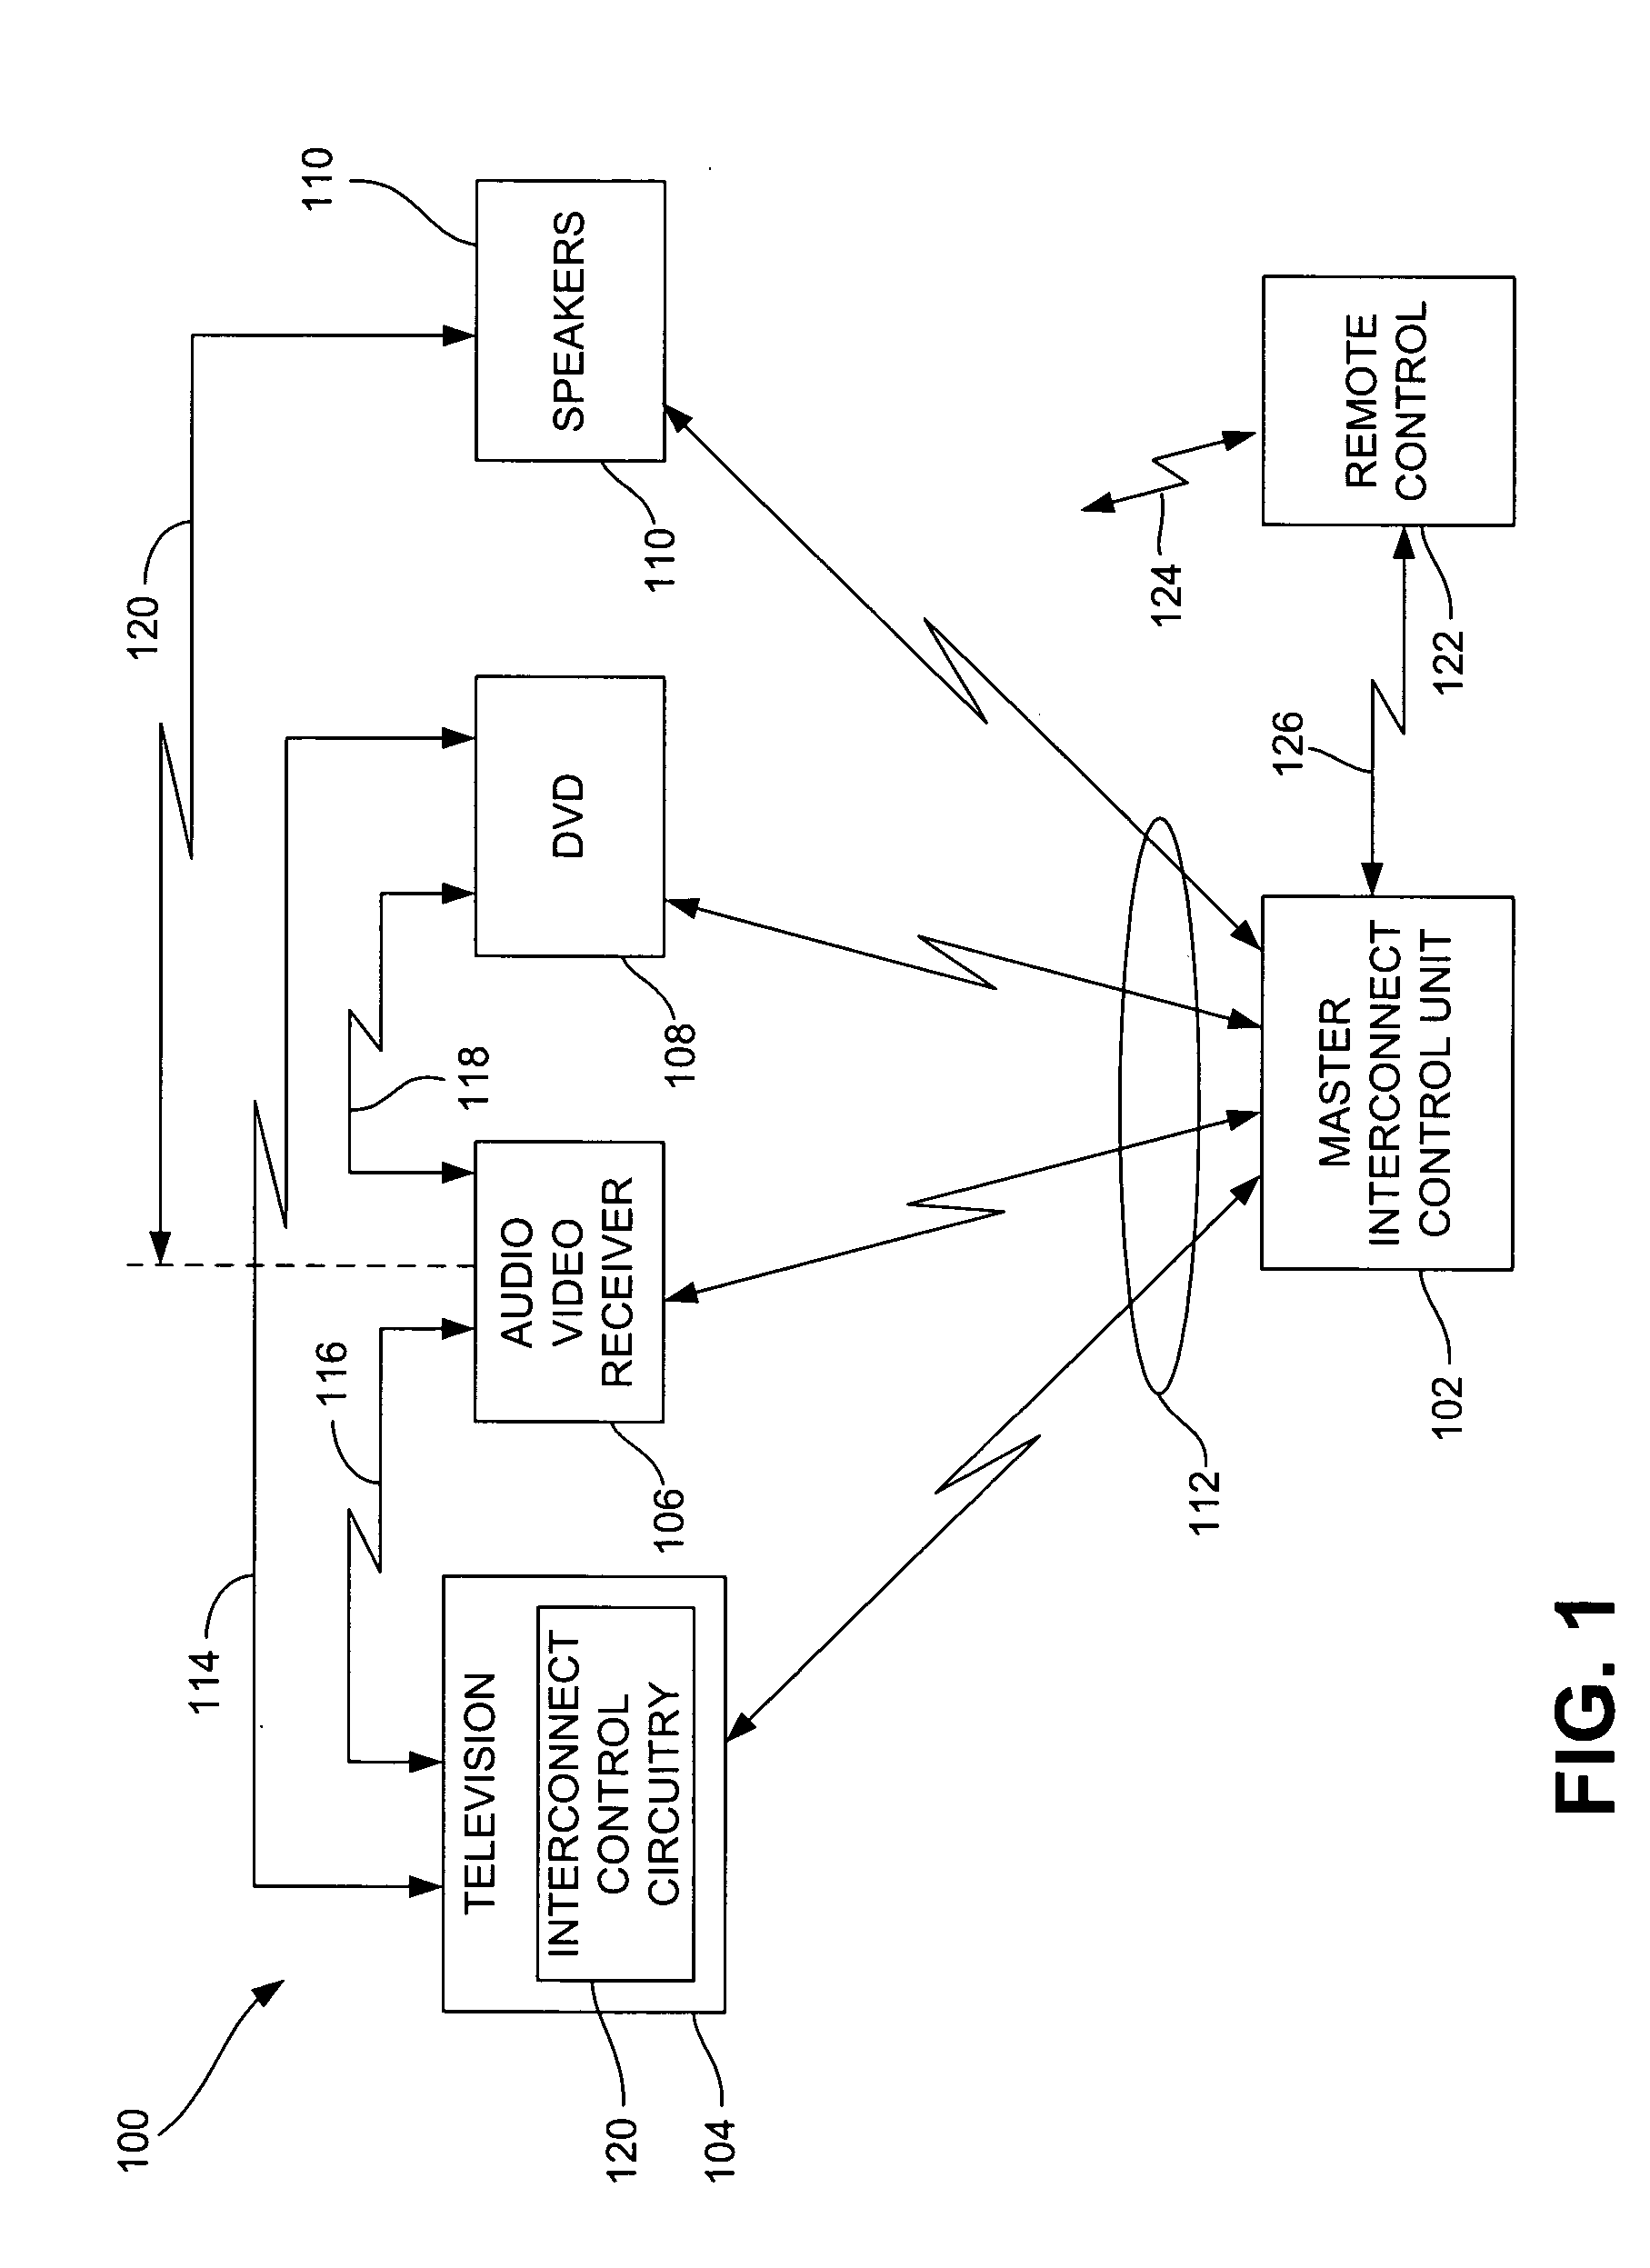 Wireless home entertainment interconnection and control system and method